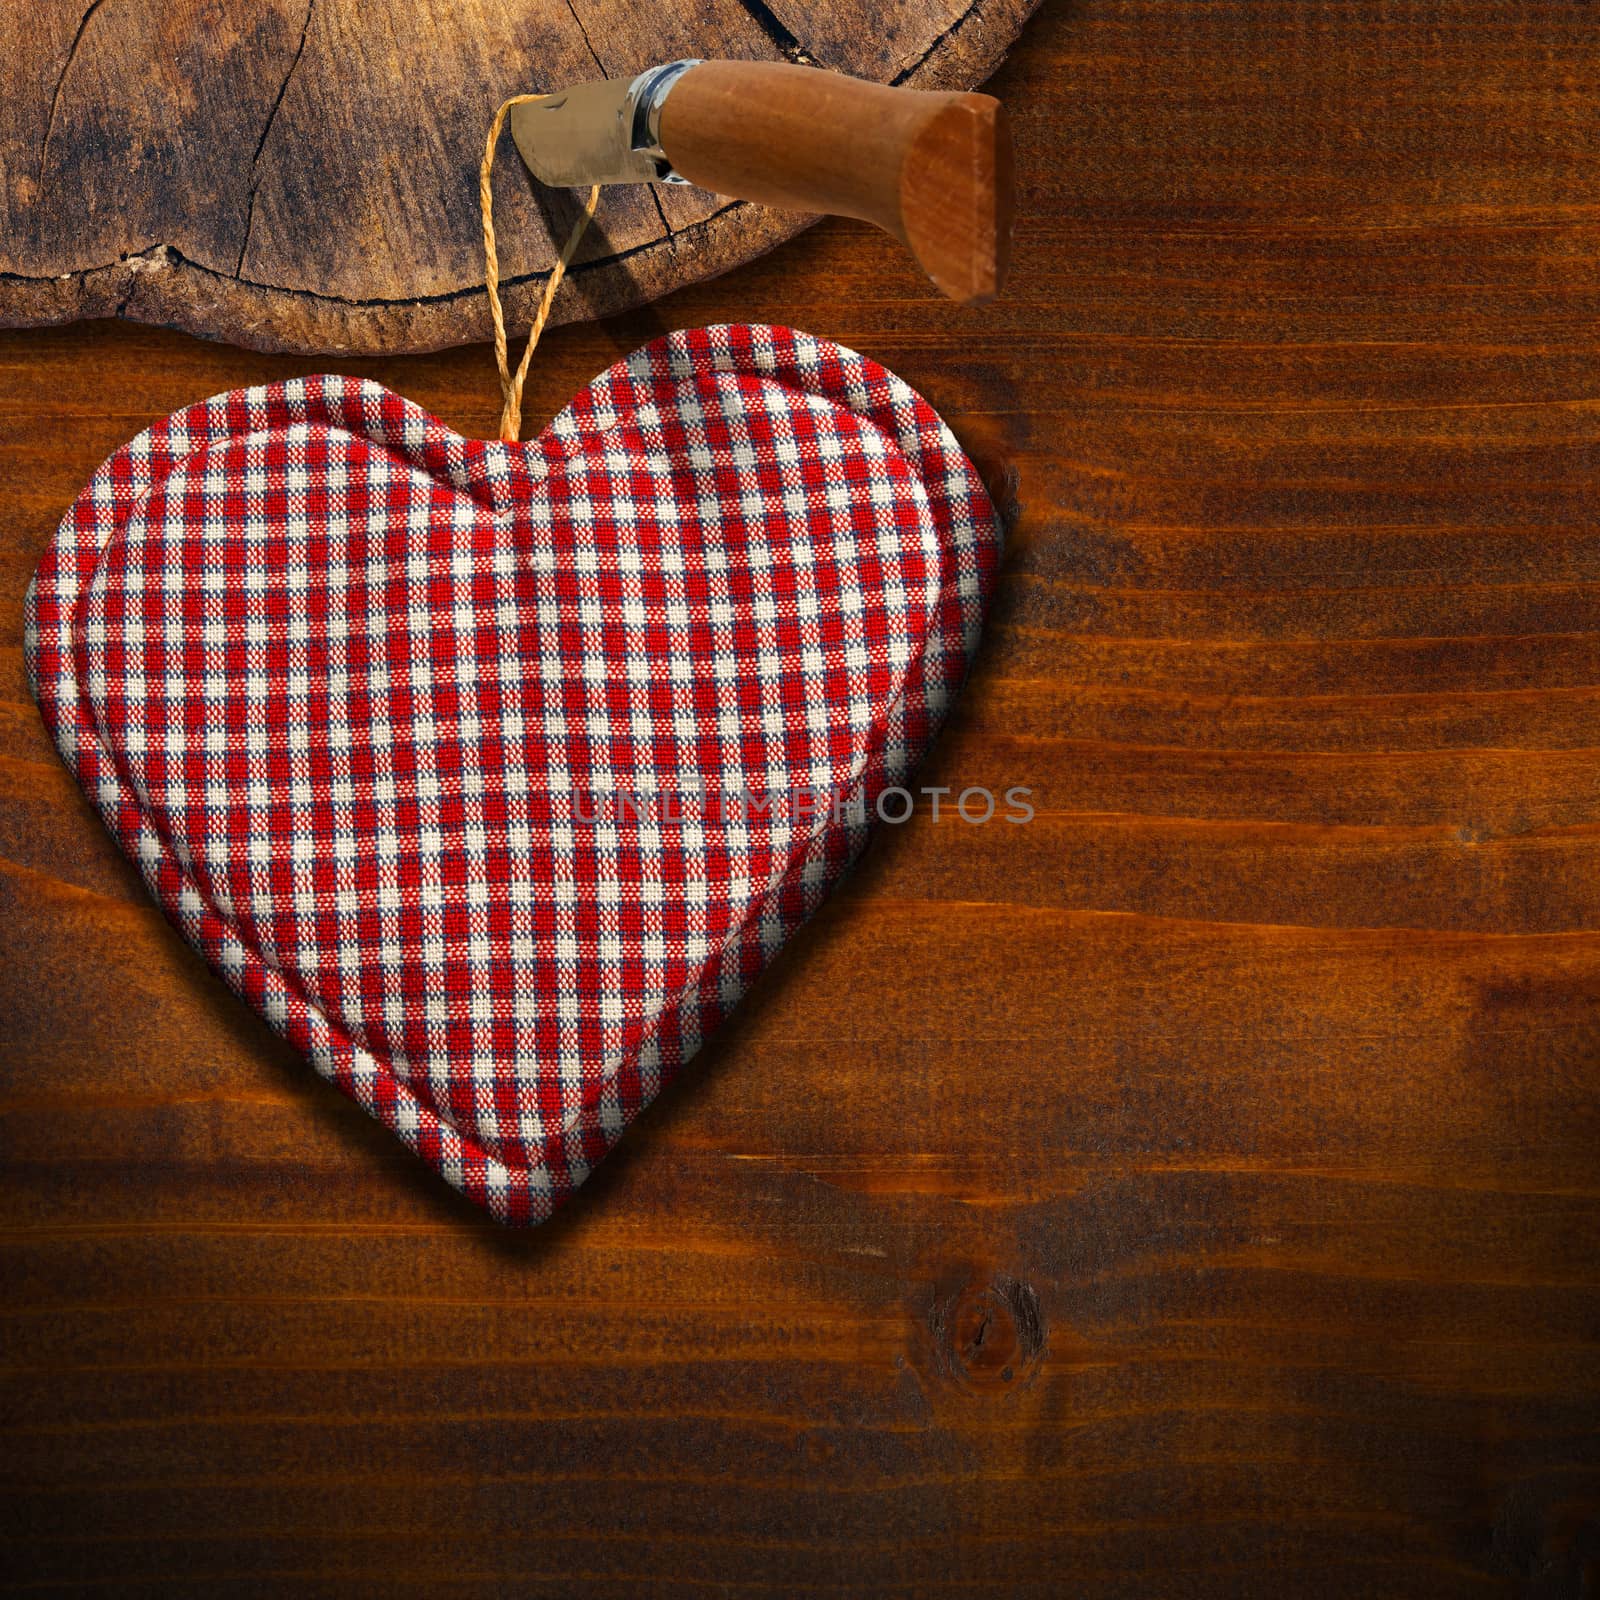 Handmade clothe heart hanging on wooden background with trunk section